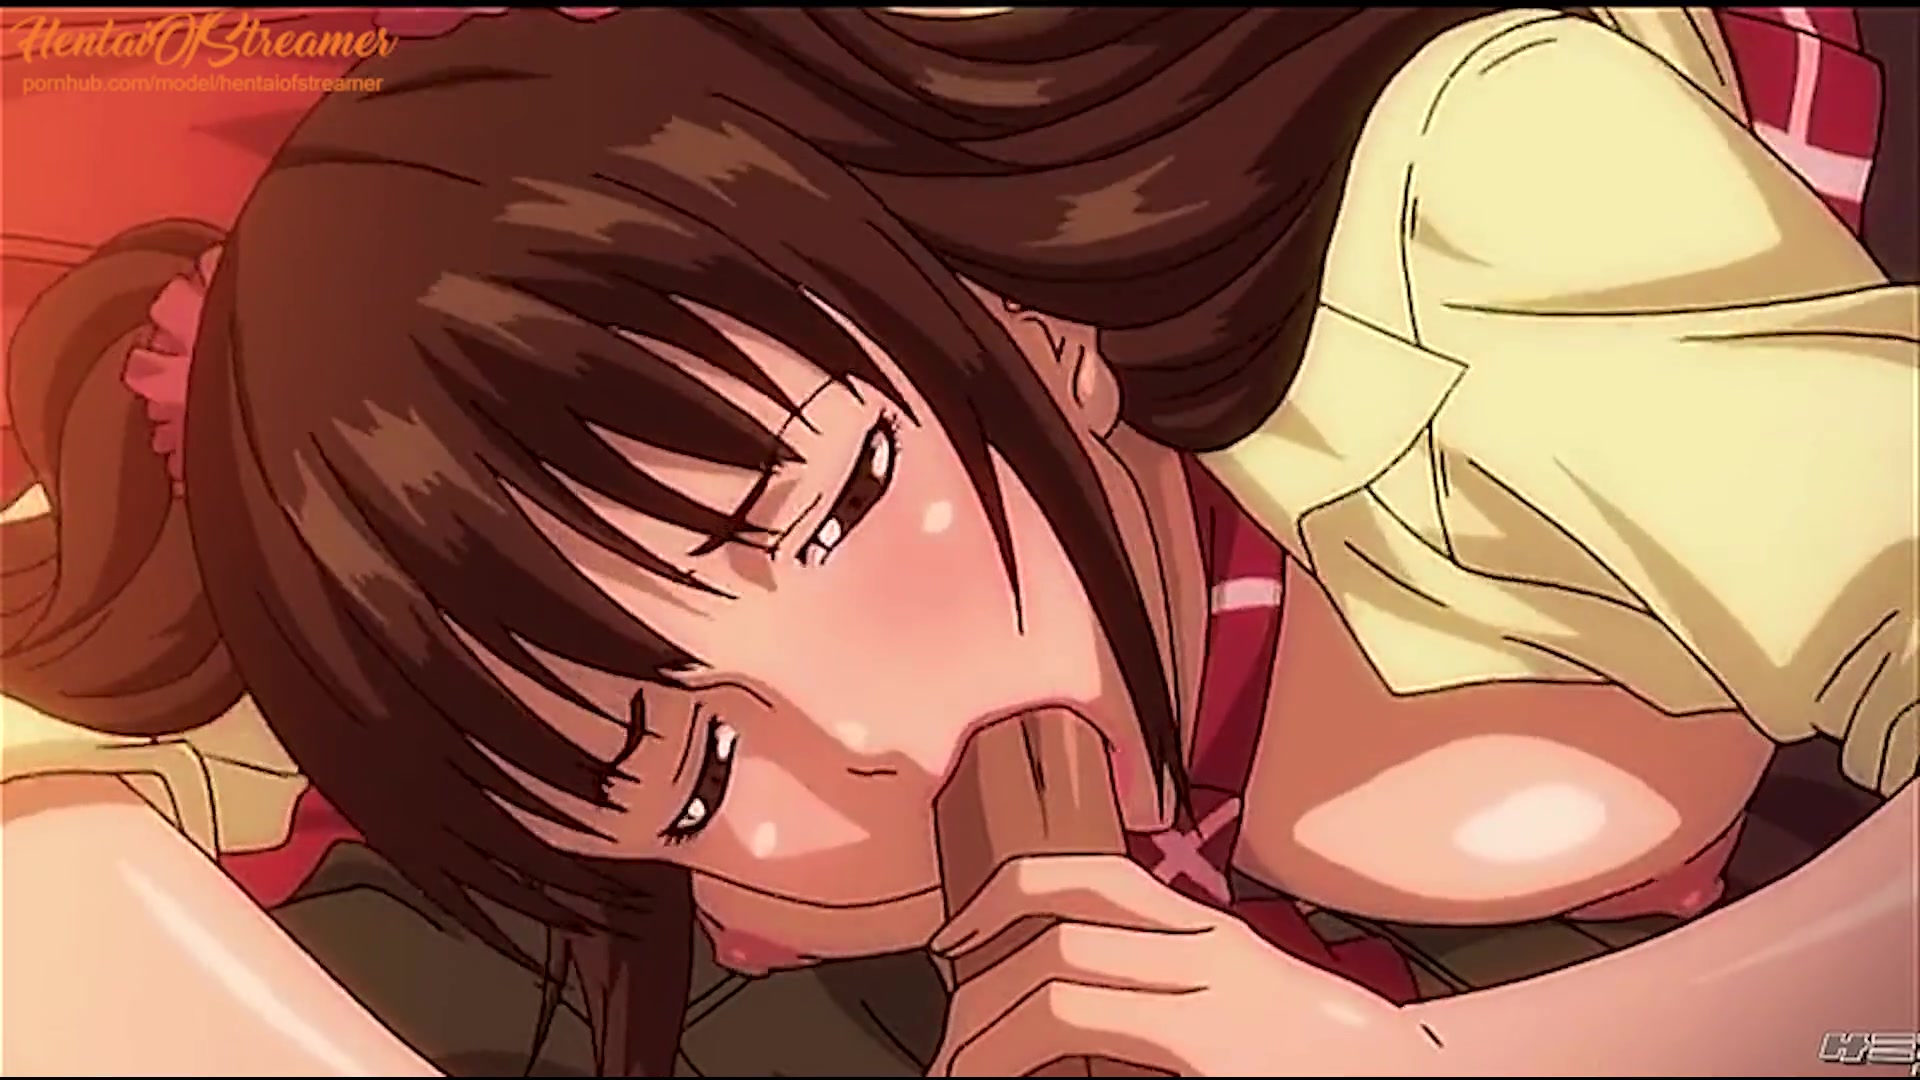 Hentai Uncensored Spread Anime Pussy - Anime Porn Uncensored - Hotwife Dude Sees his Gf Plumb and Deep-Throat off  another Stud - Anime Porn, Anime - uiPorn.com